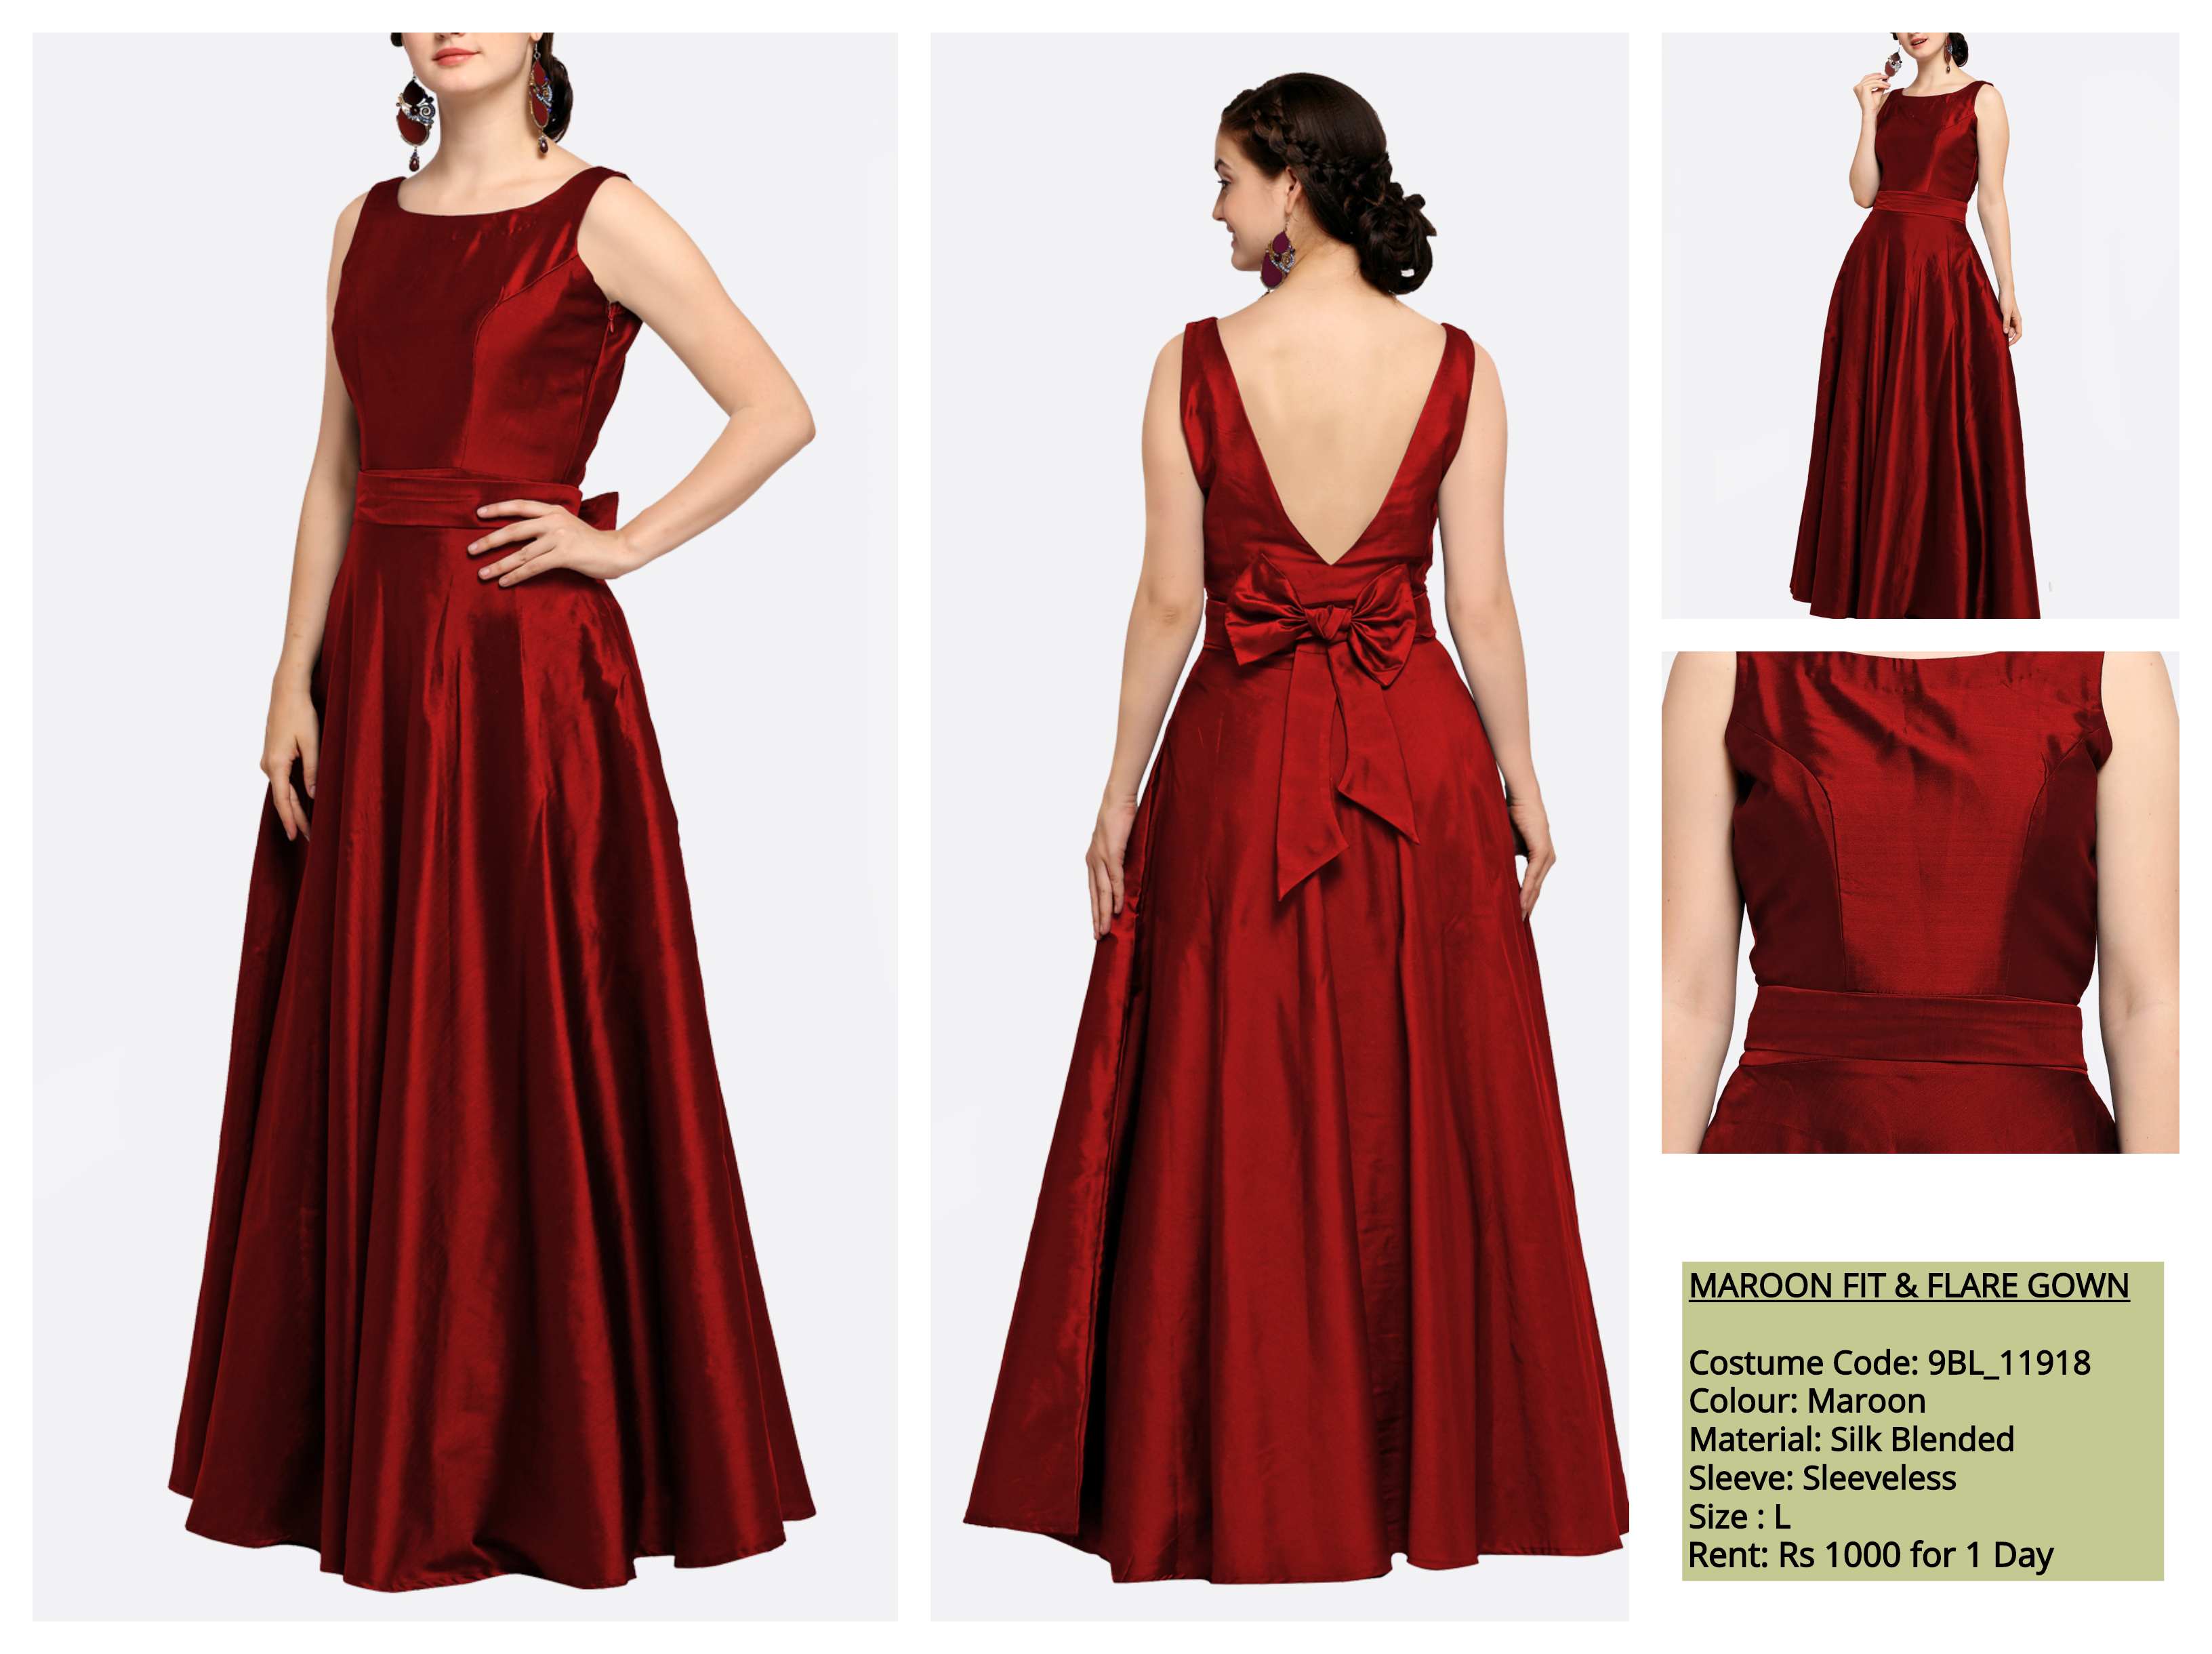 Maroon Fit & Flare Gown